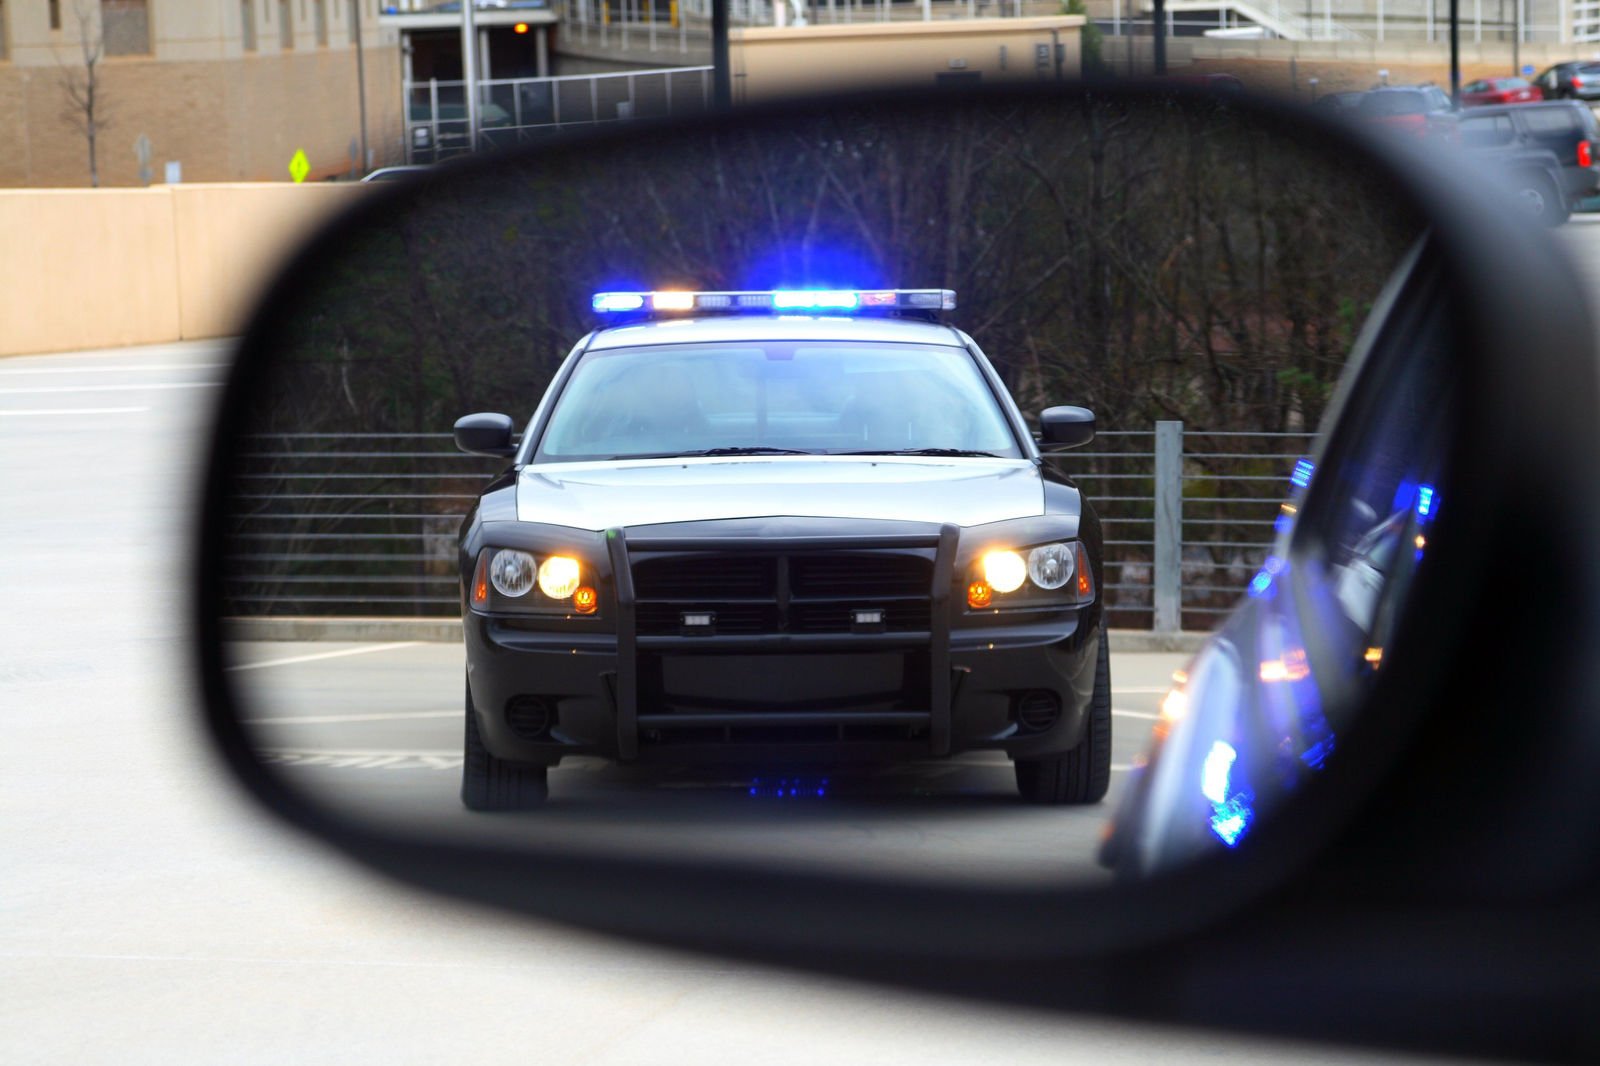 Does a negligent driving ticket affect car insurance rates?